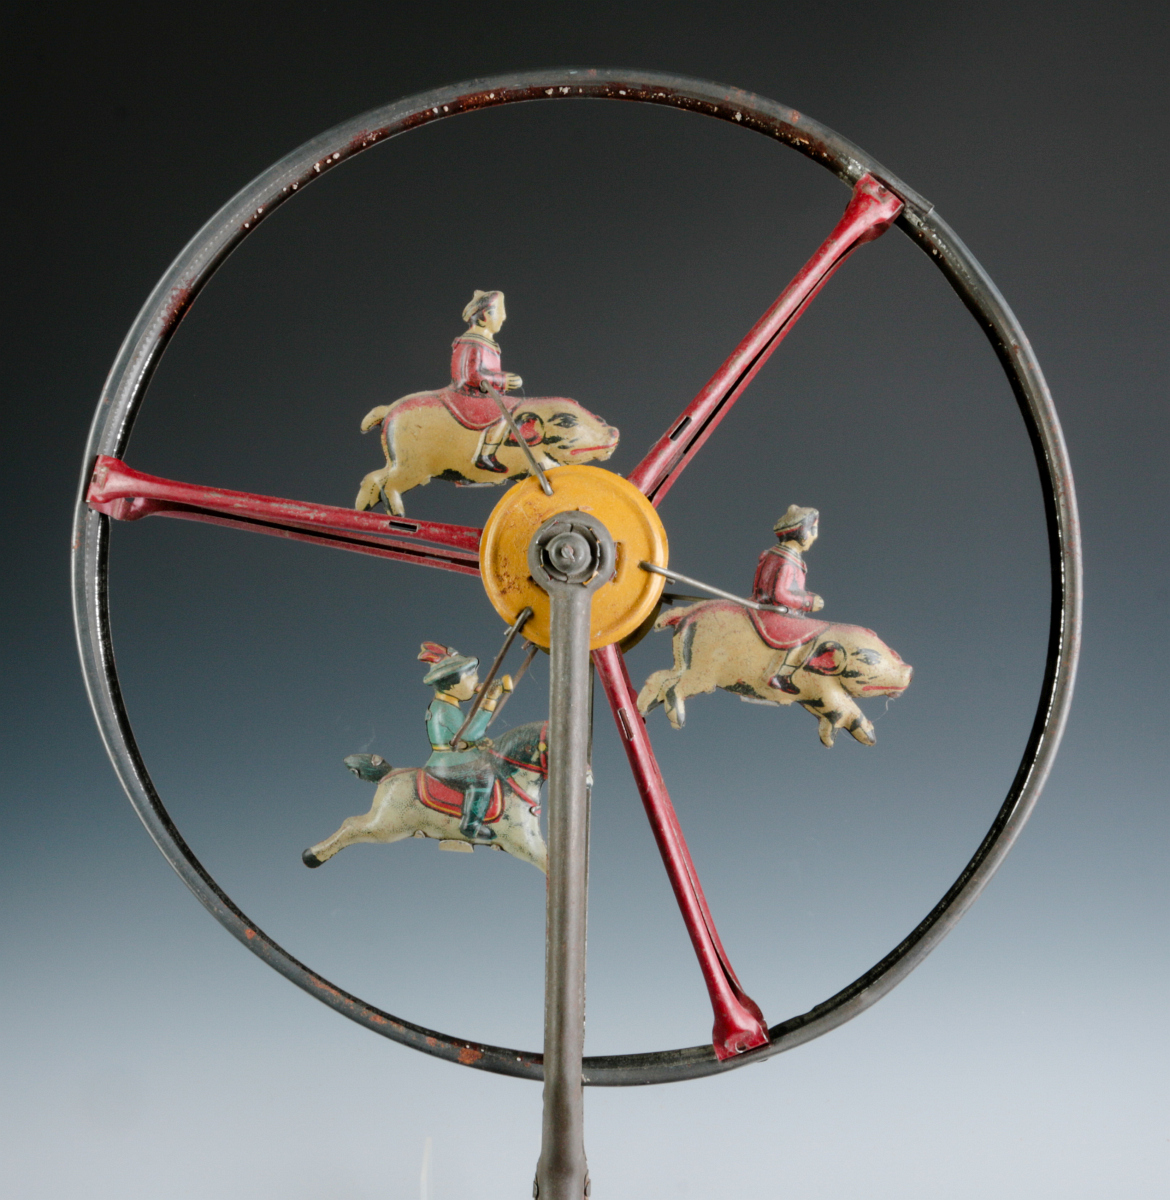 A CHILD'S TIN LITHO ROLL-A-LONG WHEEL TOY C. 1900